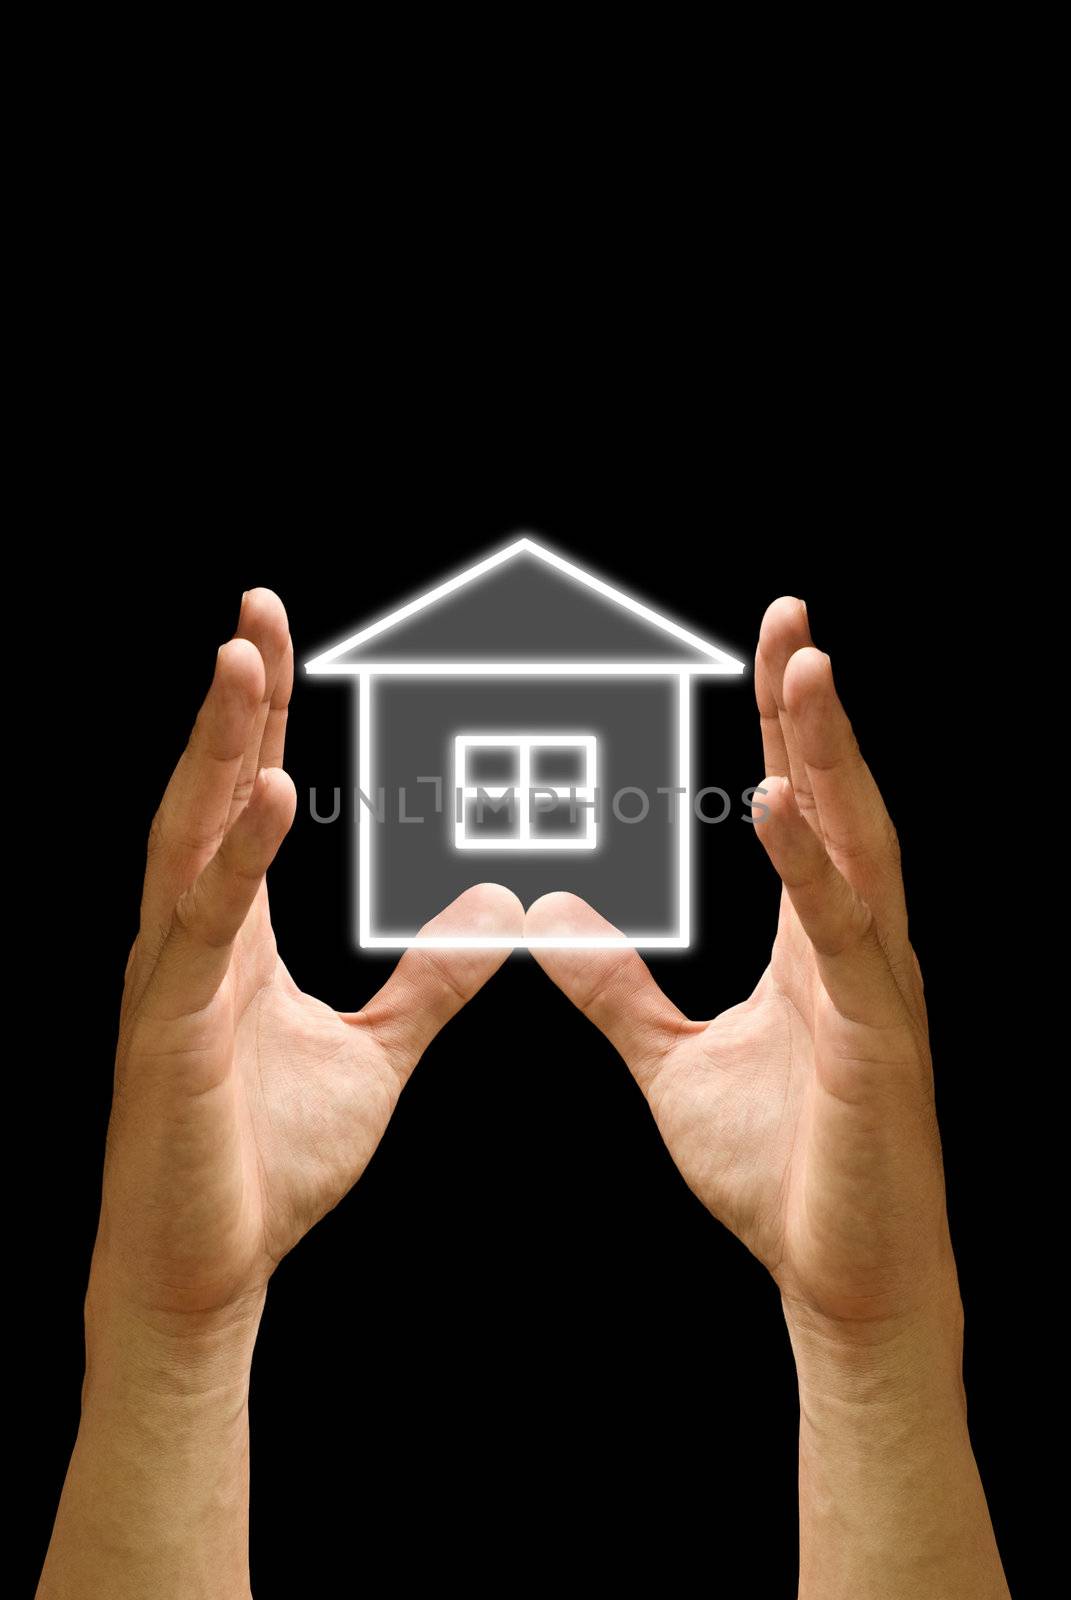 House icon in the hand, Isolated